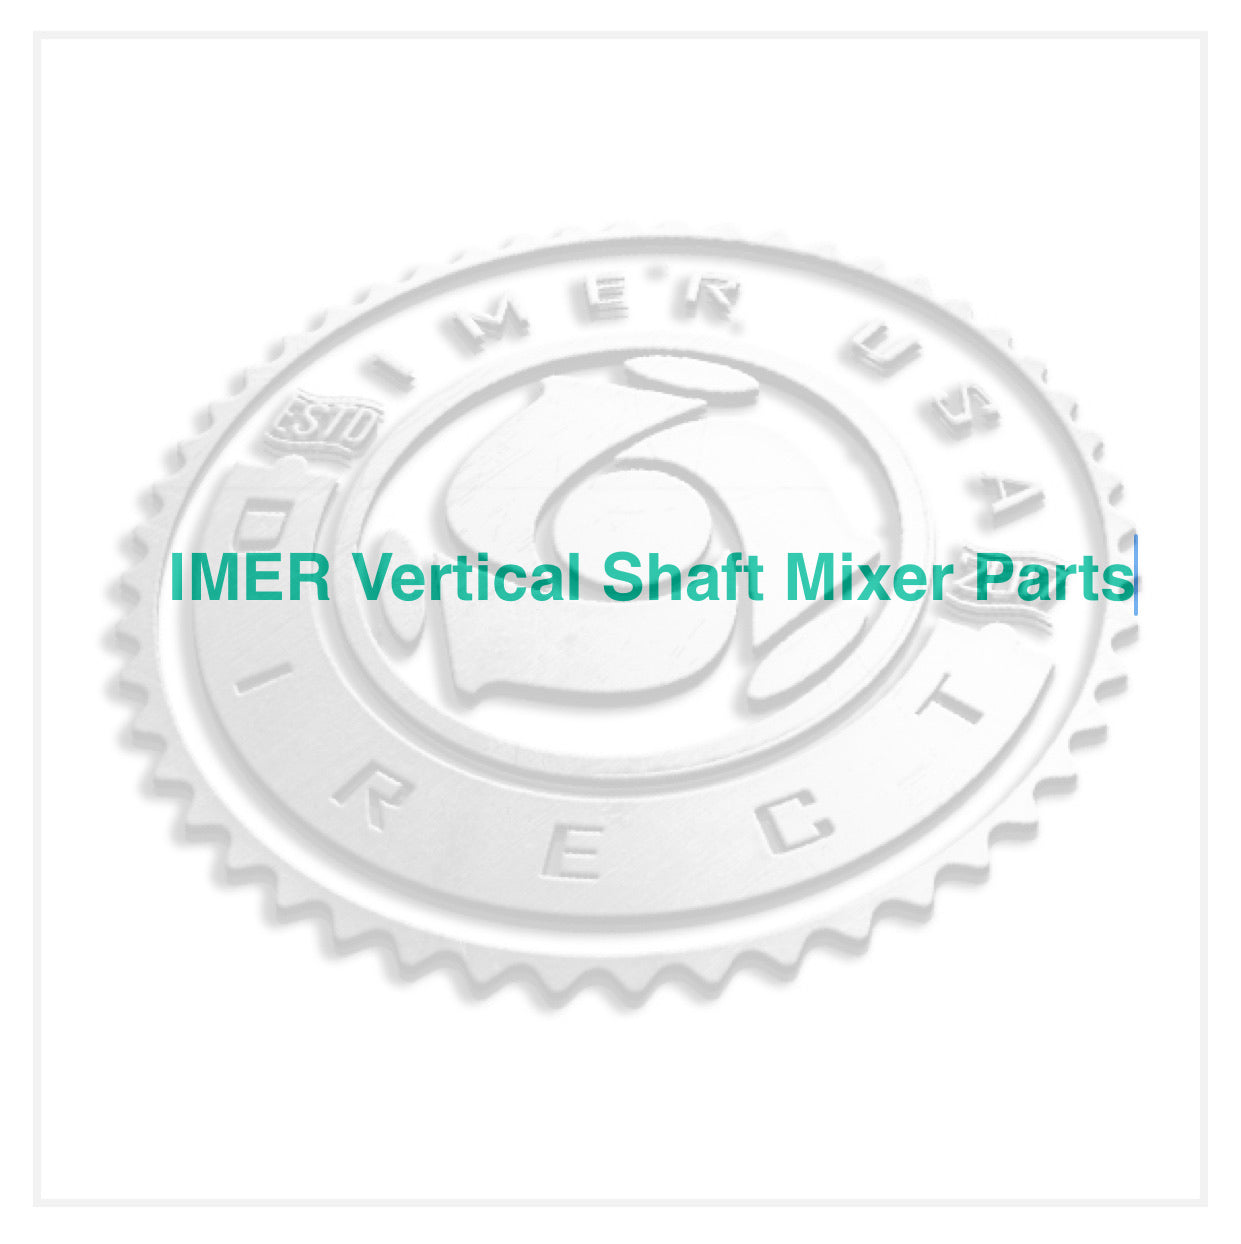 IMER Part Number 3211222 - Face Plate ONLY - Outer Paddle - IMER MIX 360/750 Mixer